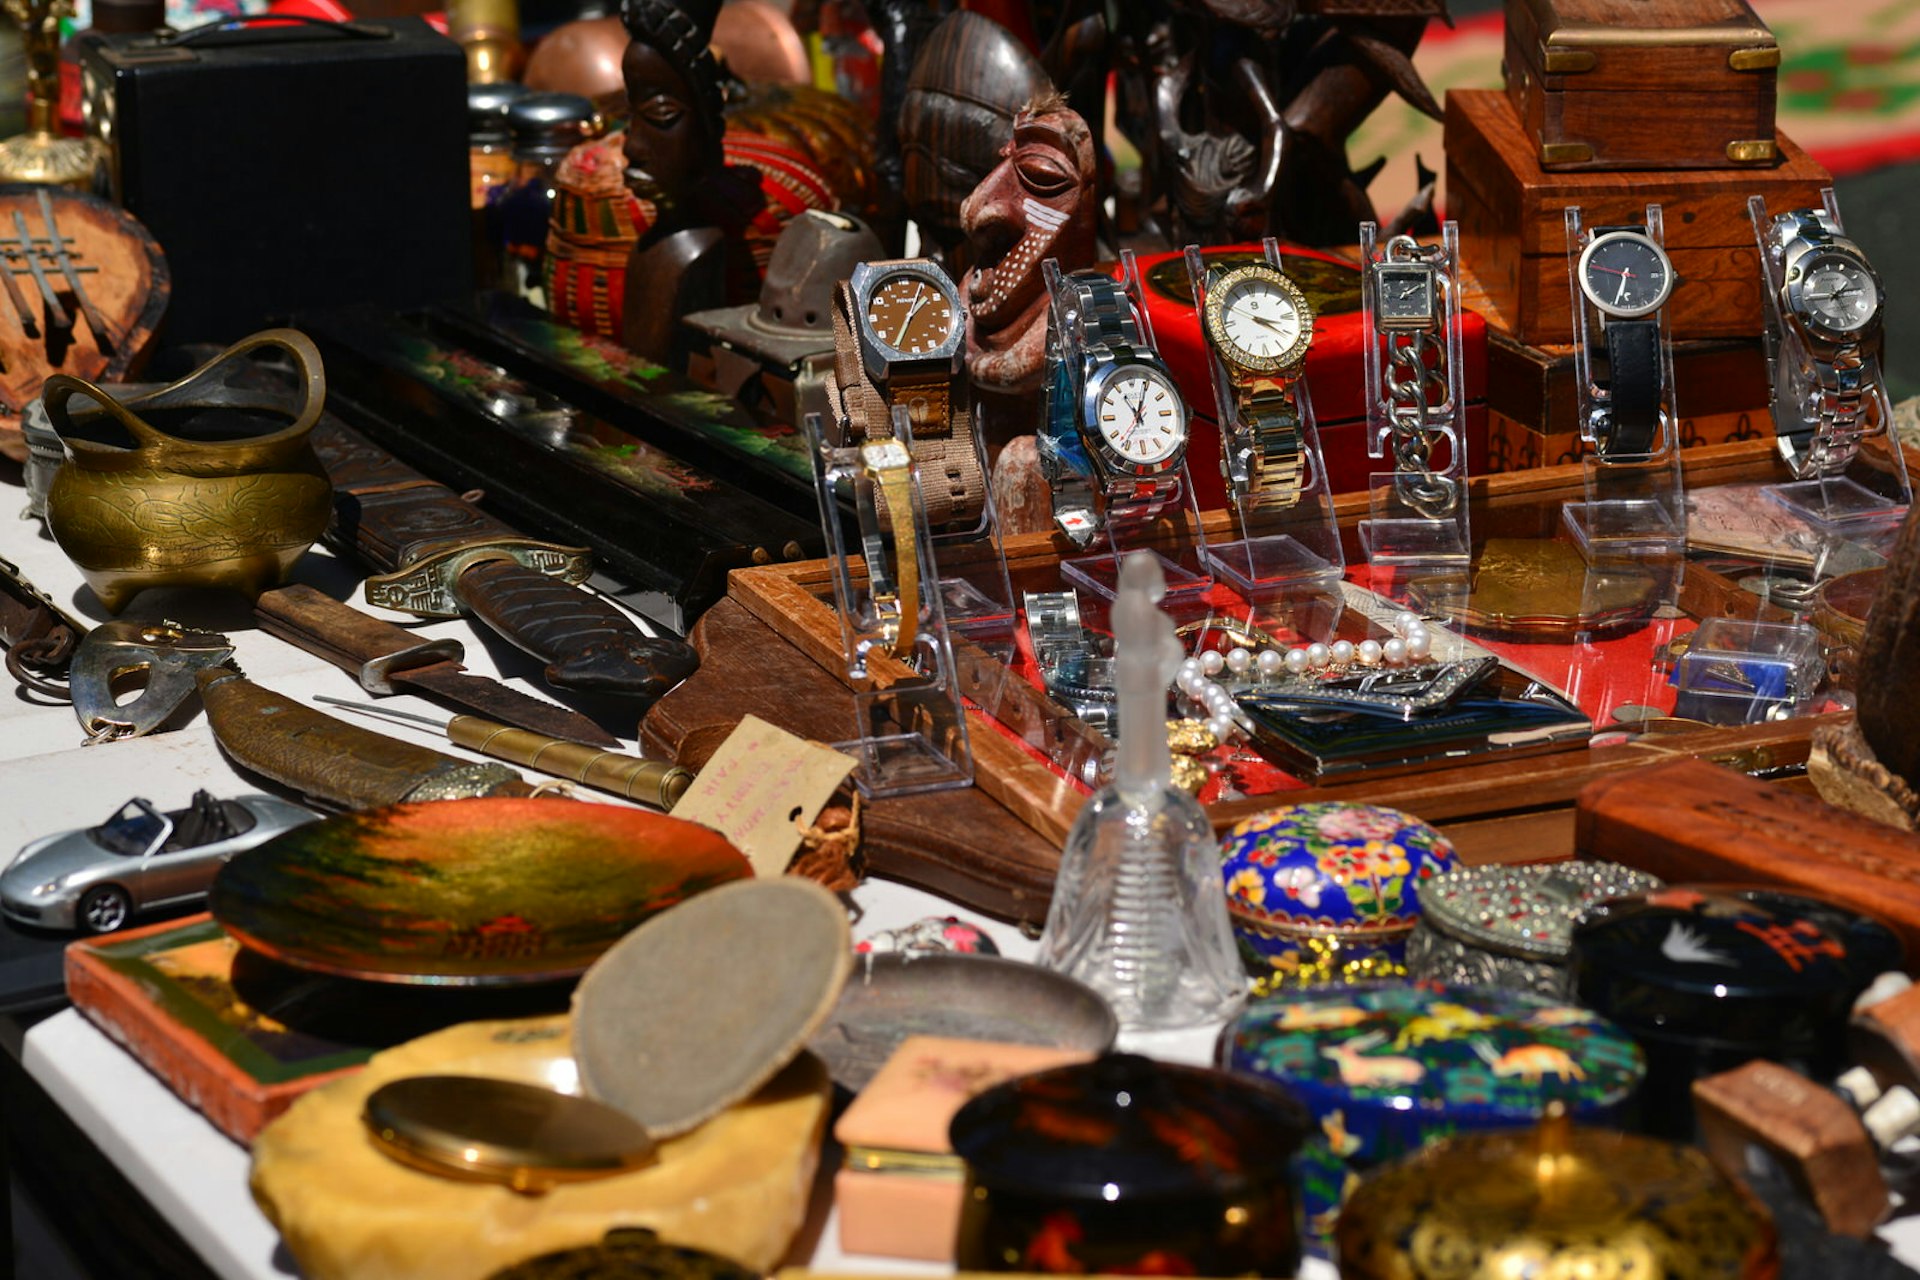 Various bric-a-brac is displayed at Rozelle Collectors Market including: watches, enamel boxes, knives, metal pots and wooden ornaments